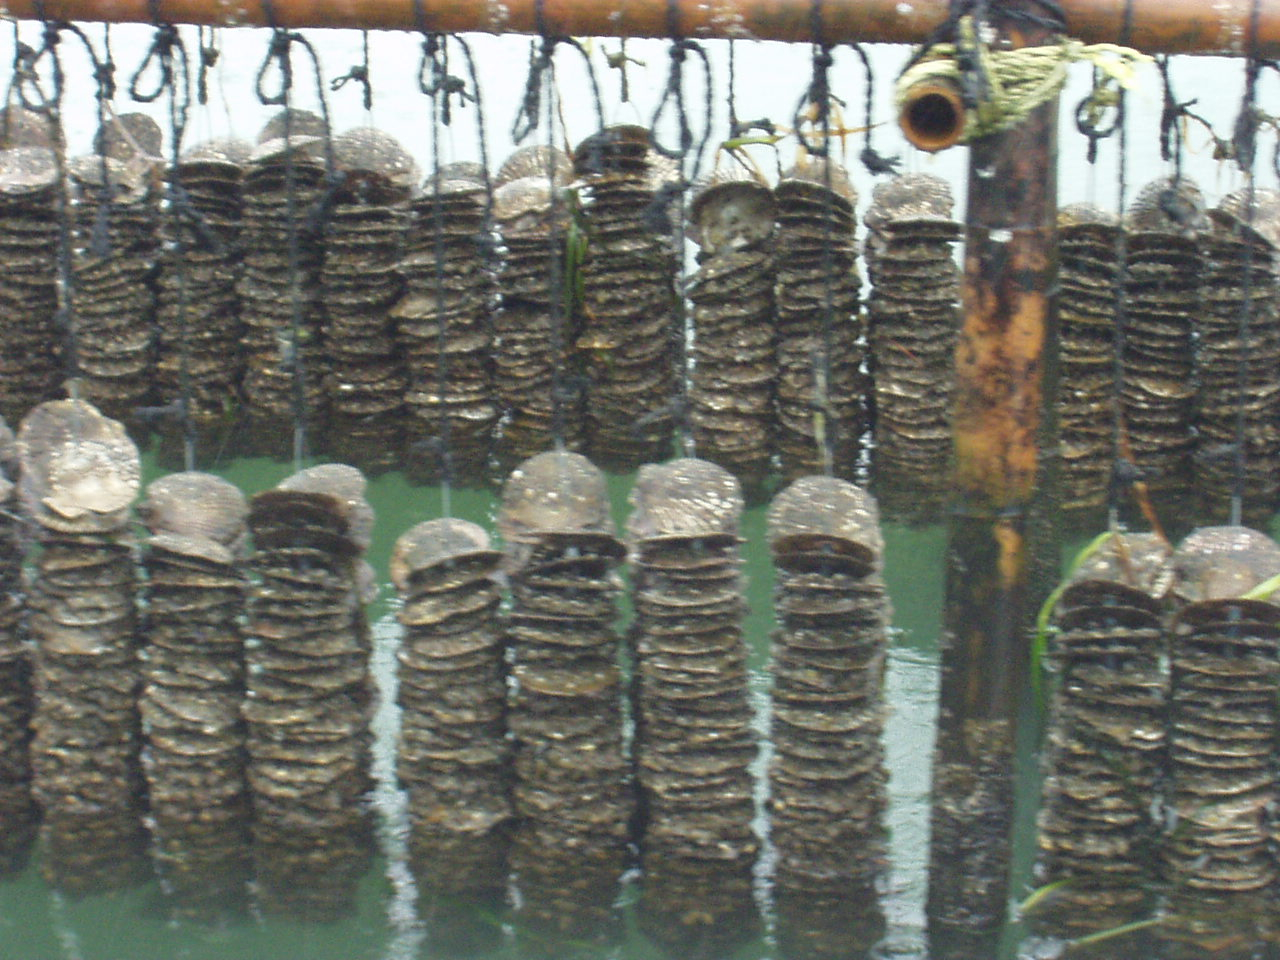 Scallop shells hanging on long-lines with oyster spat attached (small whitespots)